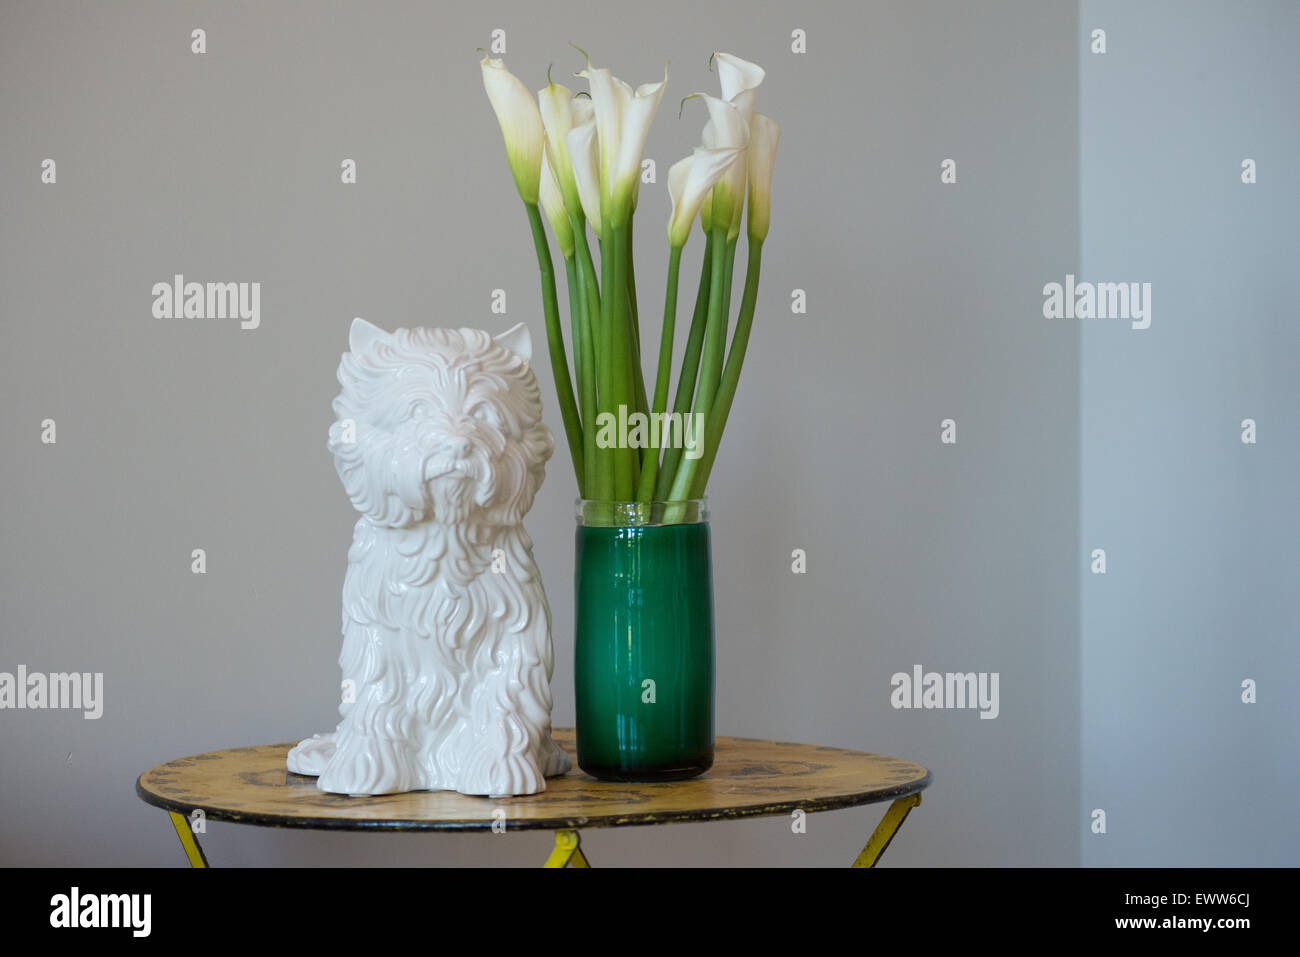 White ceramic 'Puppy Vase' by Jeff Koons next to Calla Lilies in a green glass vase Stock Photo